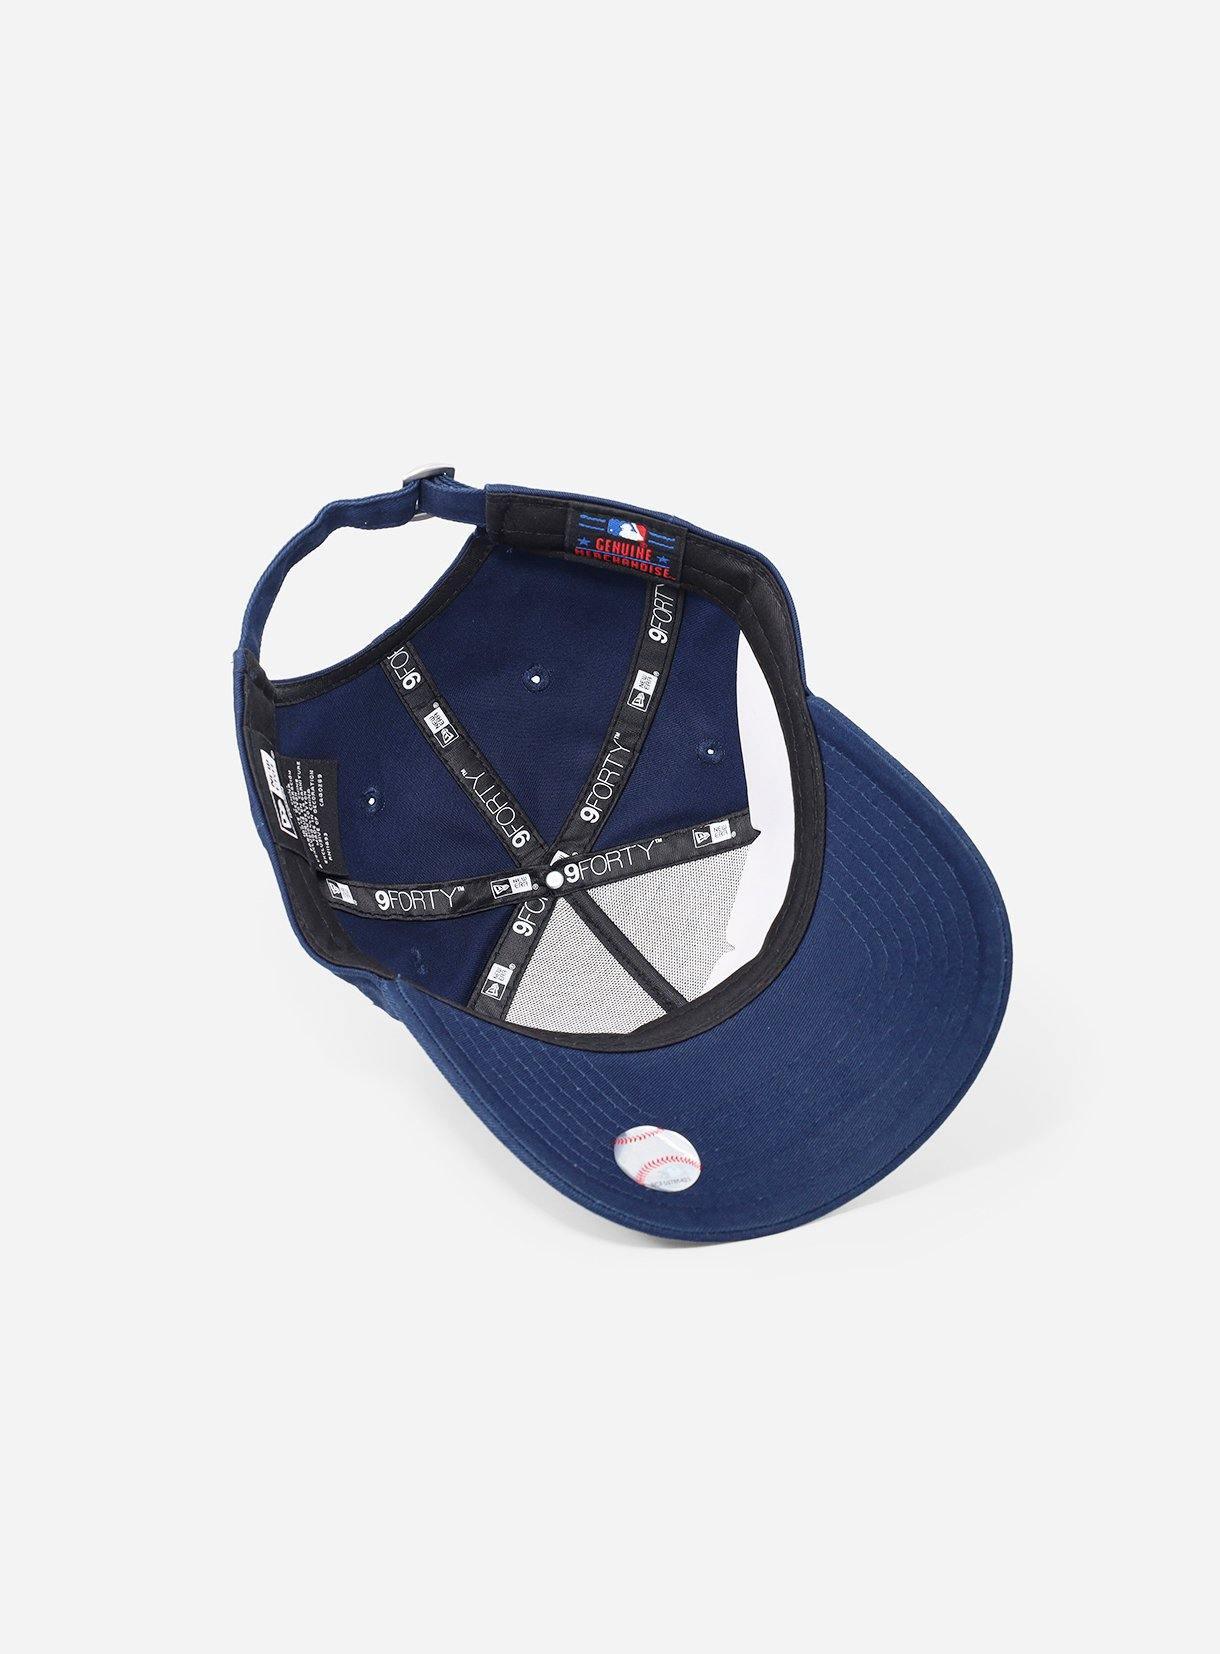 New Era Los Angeles Dodgers 9Forty Strap back - Challenger Streetwear